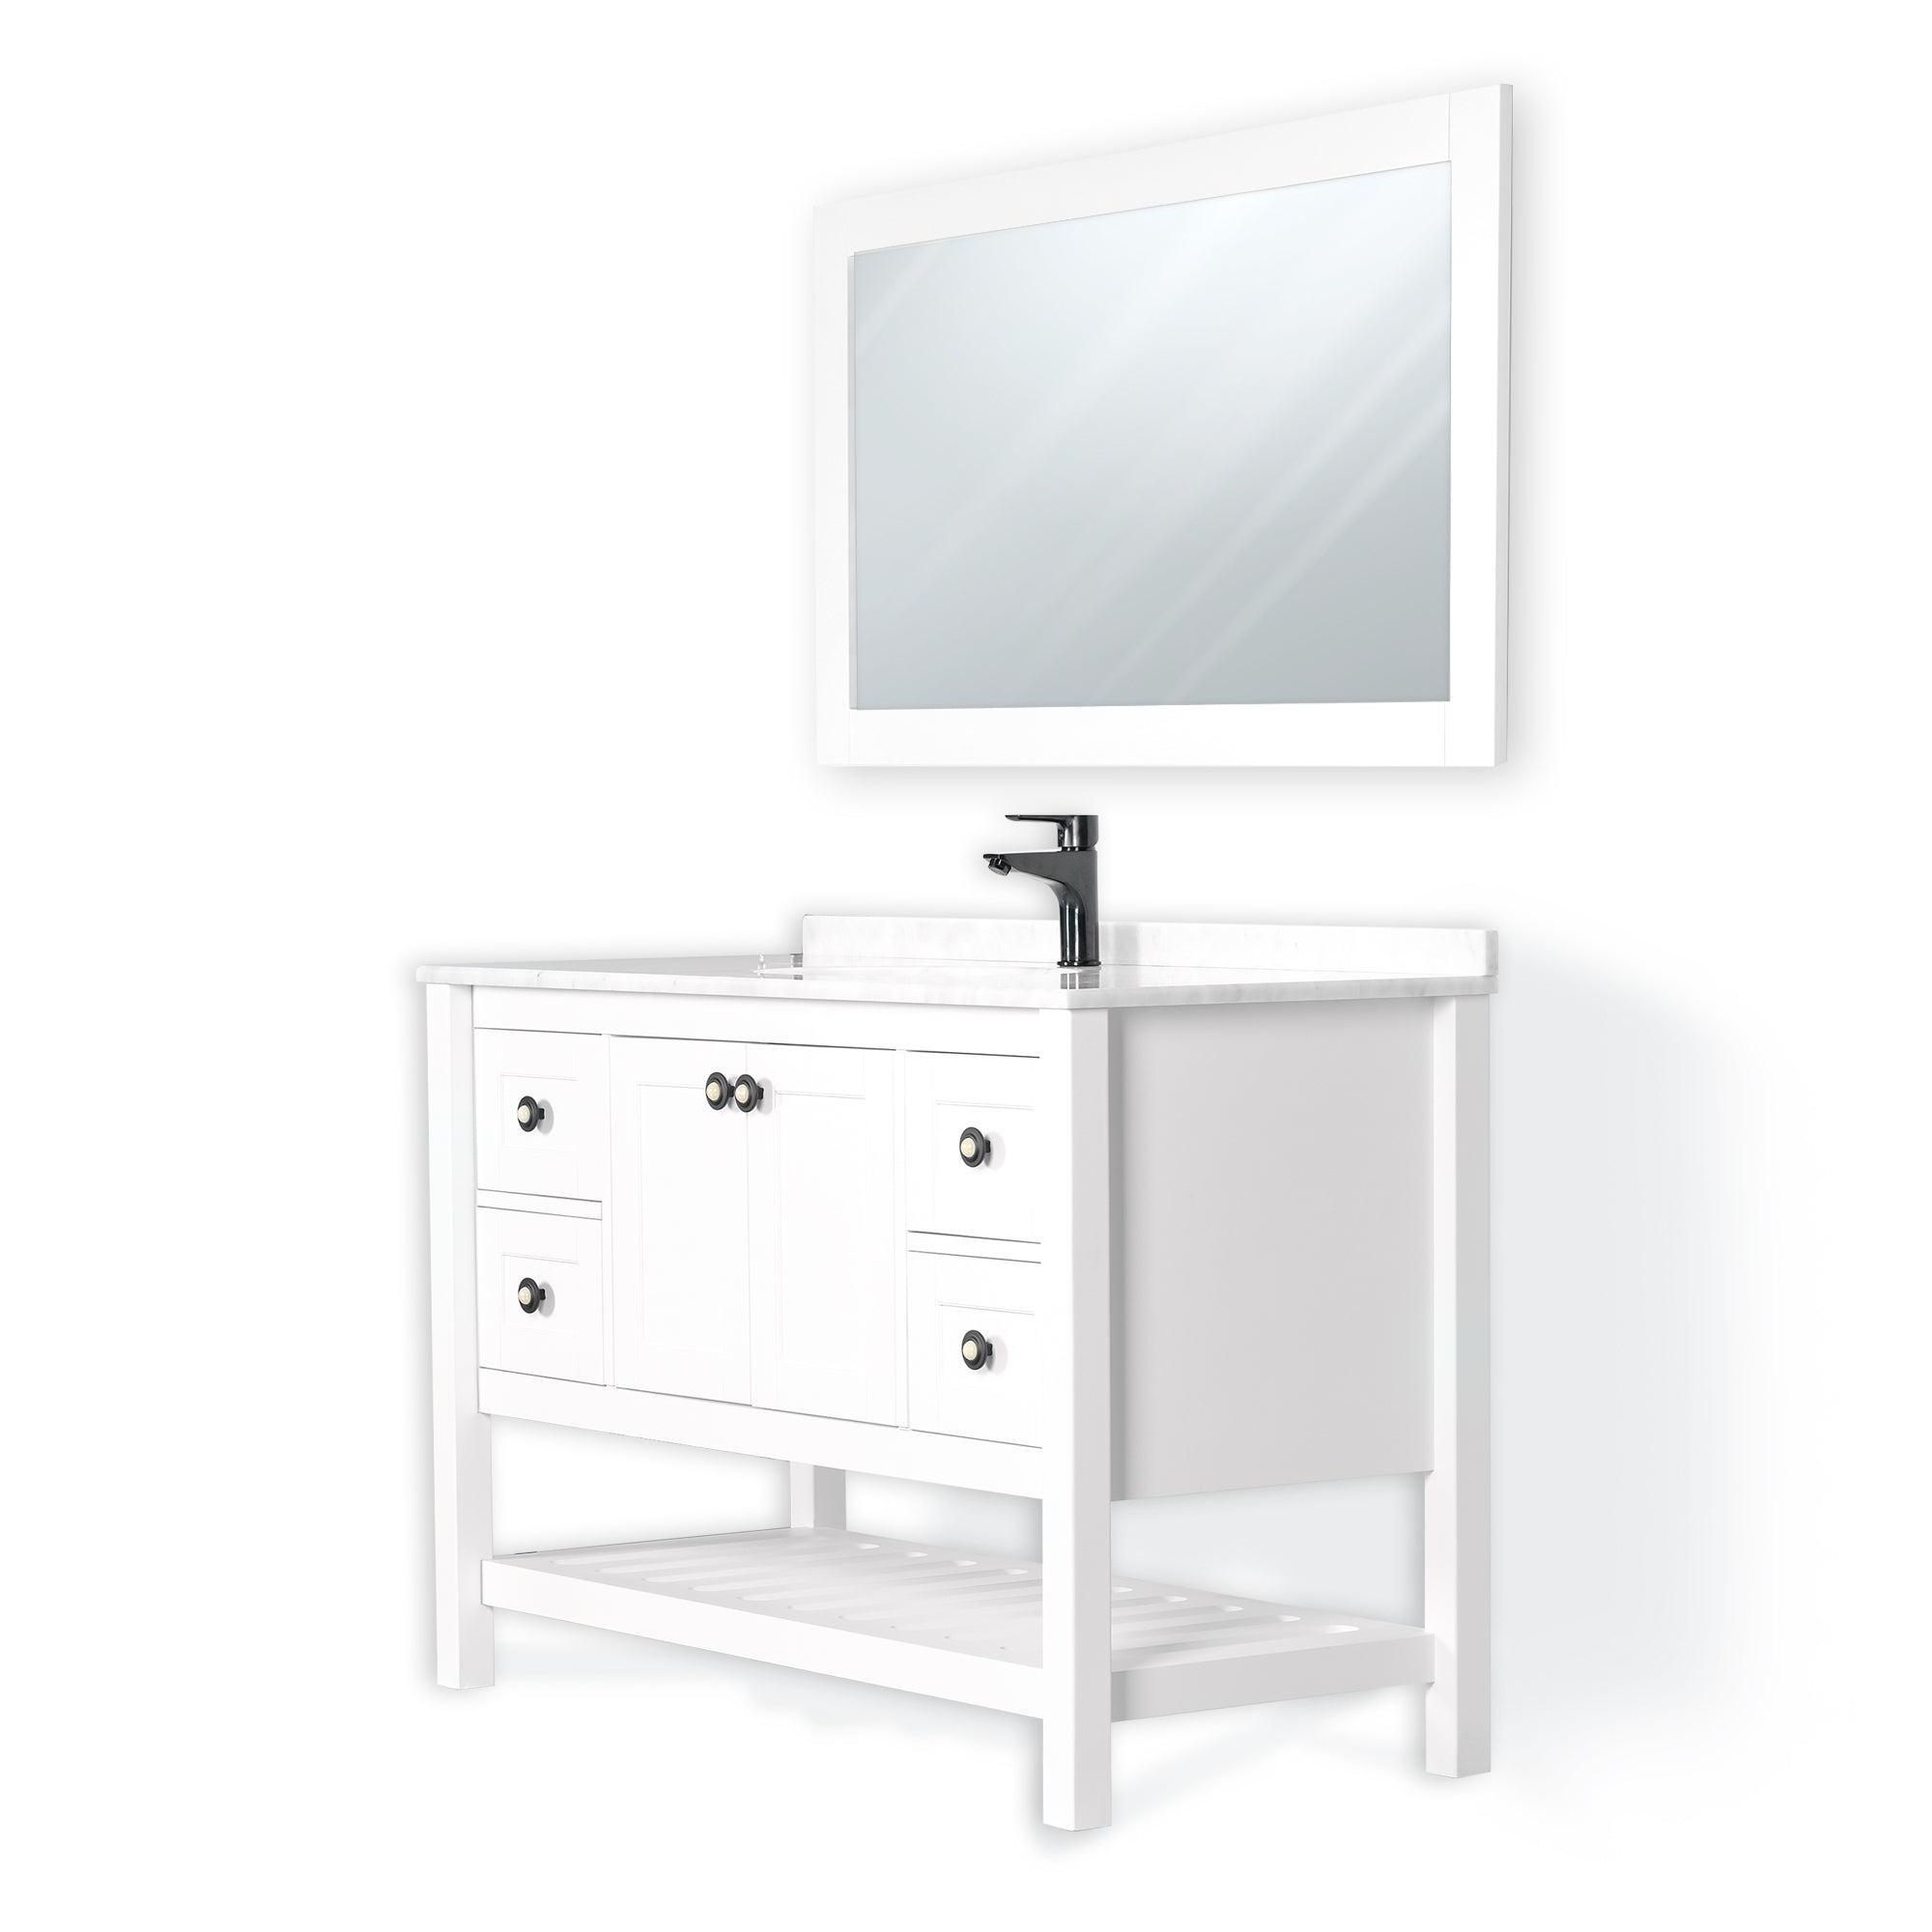 LUCCA 48 INCH FREE STANDING VANITY AND SINK COMBO WITH MATCHING MIRROR - WHITE